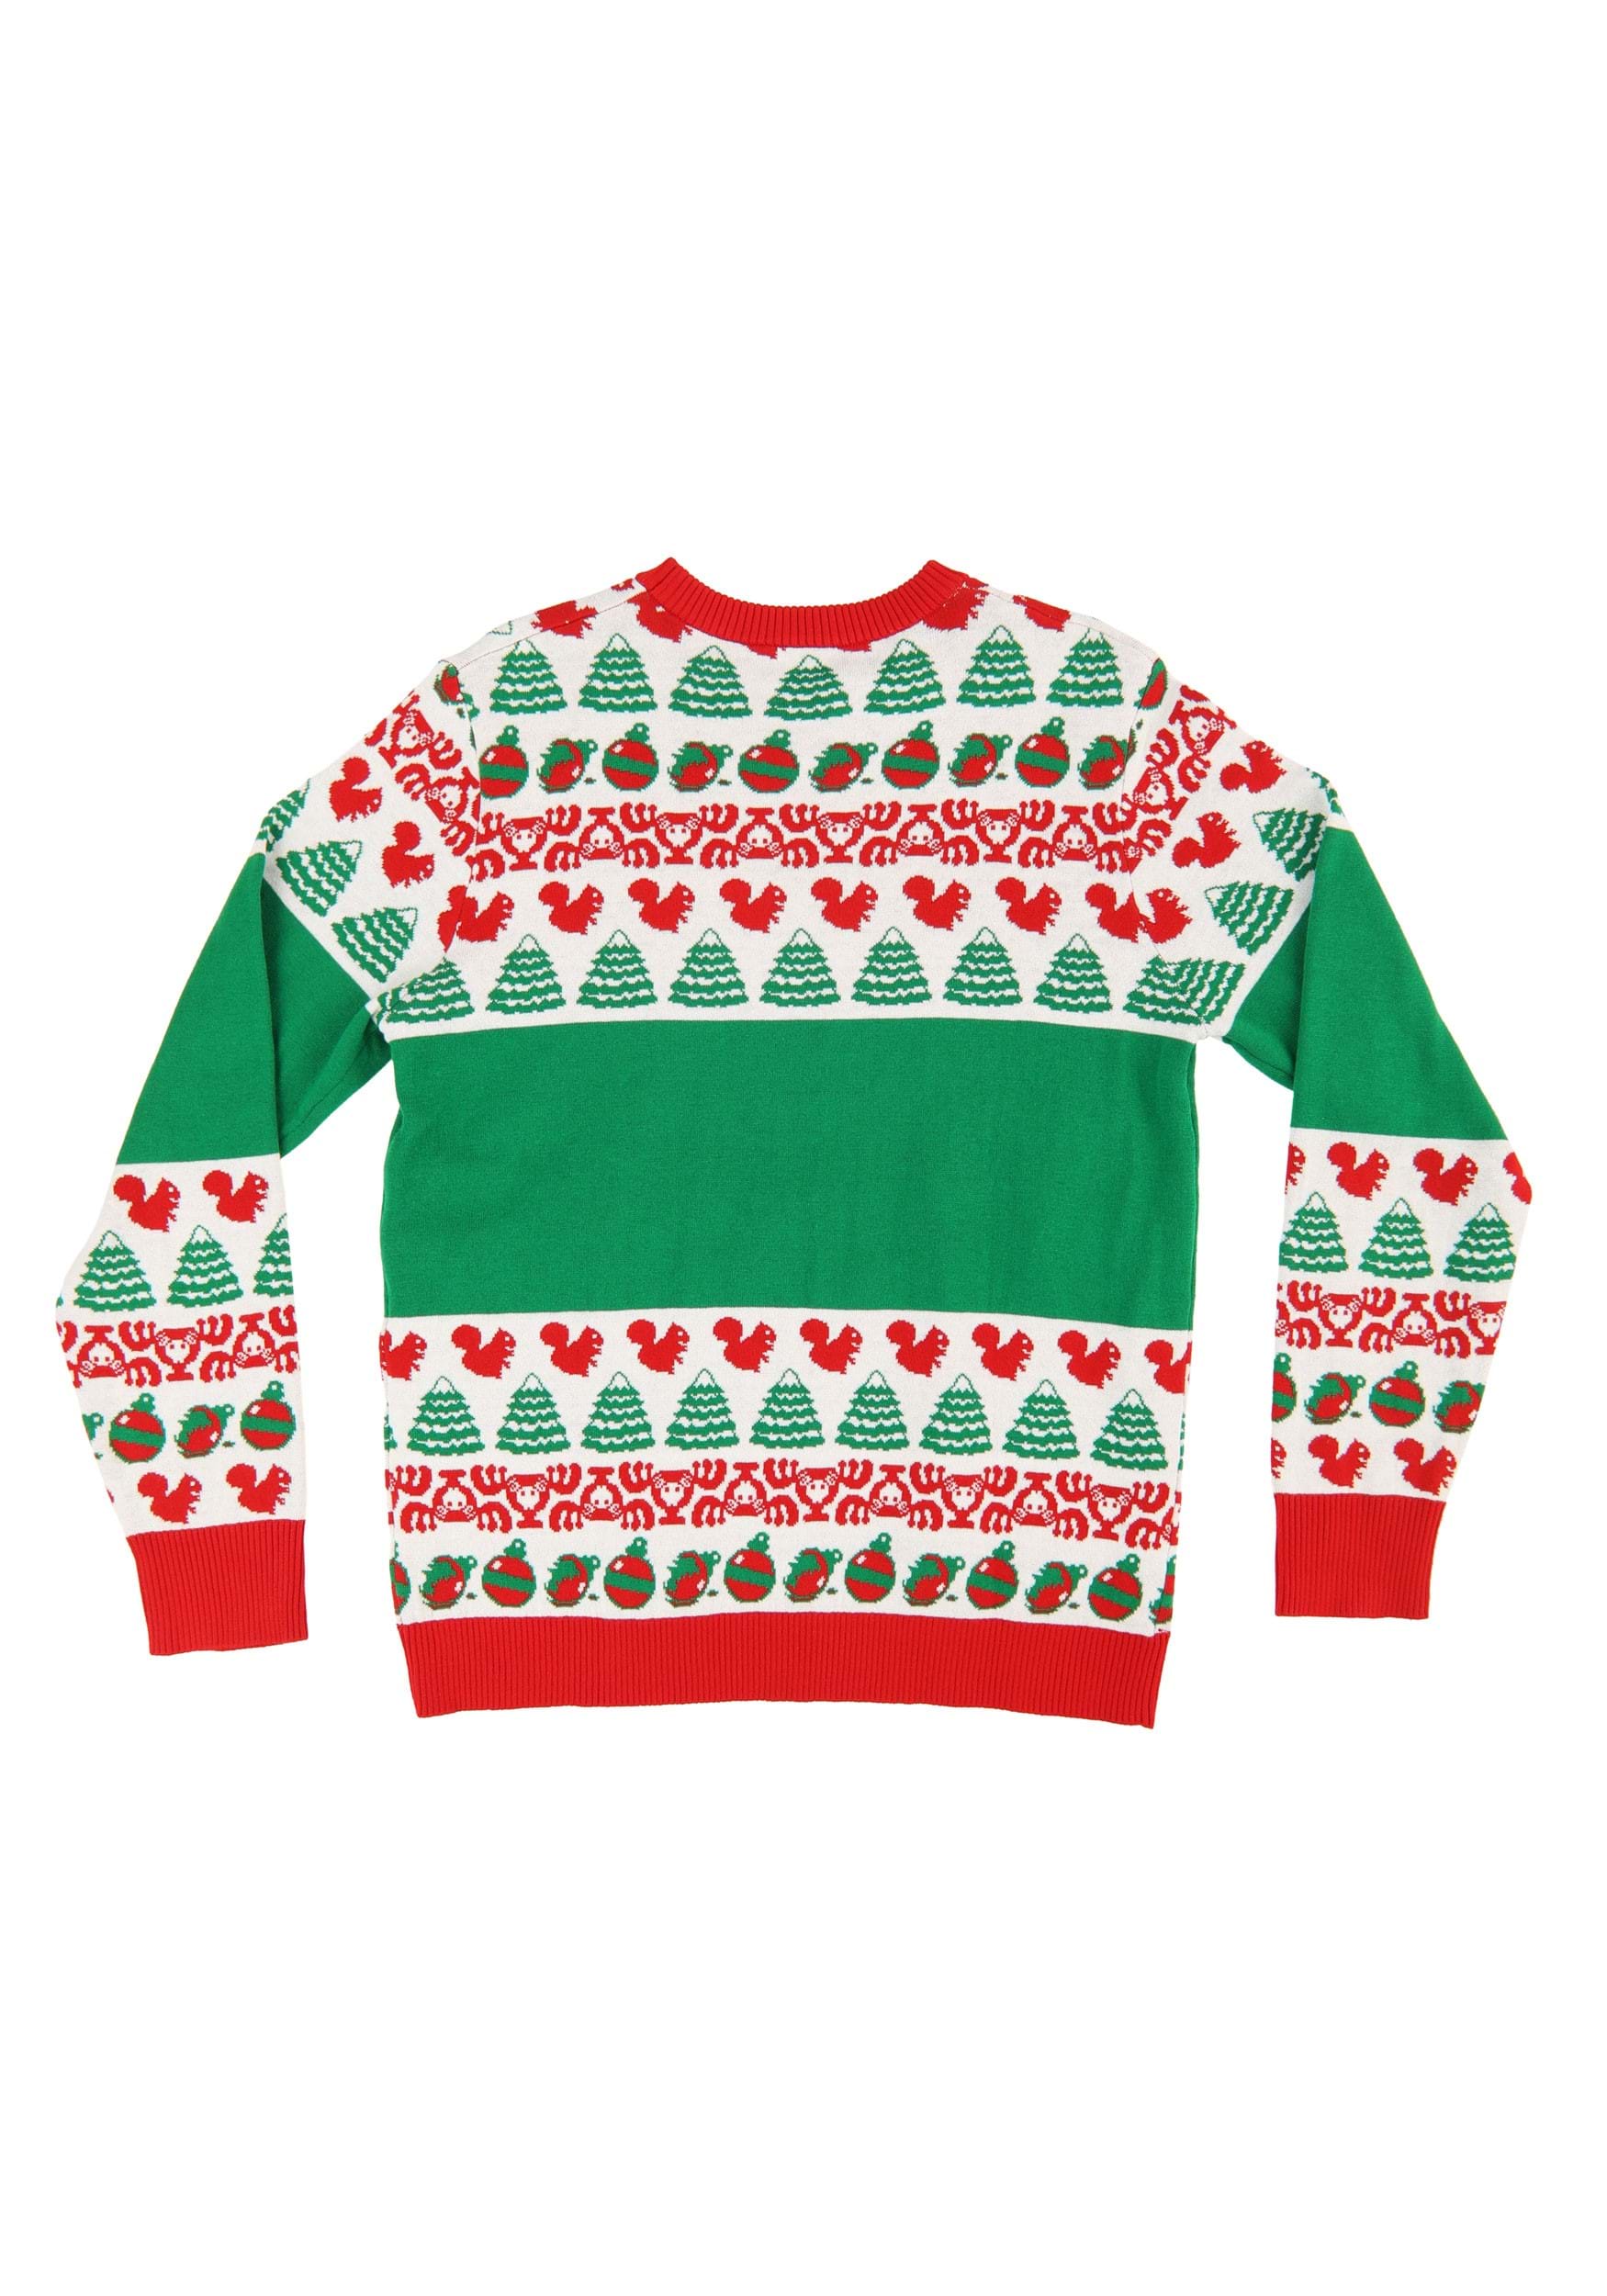 National Lampoon's Christmas Vacation Adult Sweater